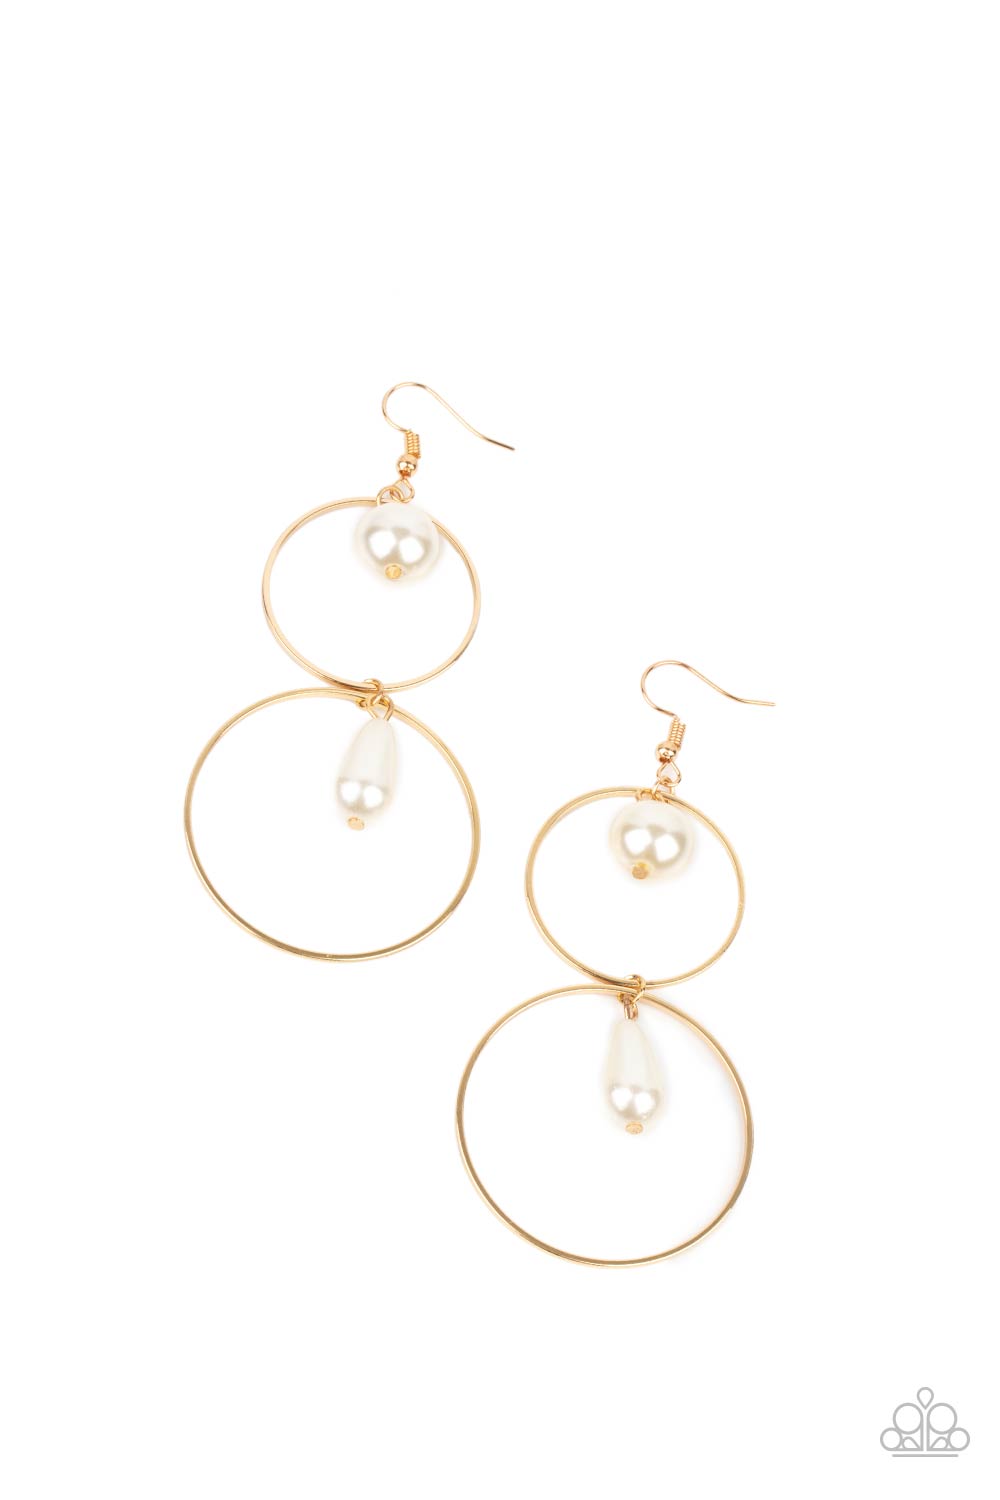 Paparazzi Cultured in Couture - Gold Earrings - A Finishing Touch Jewelry